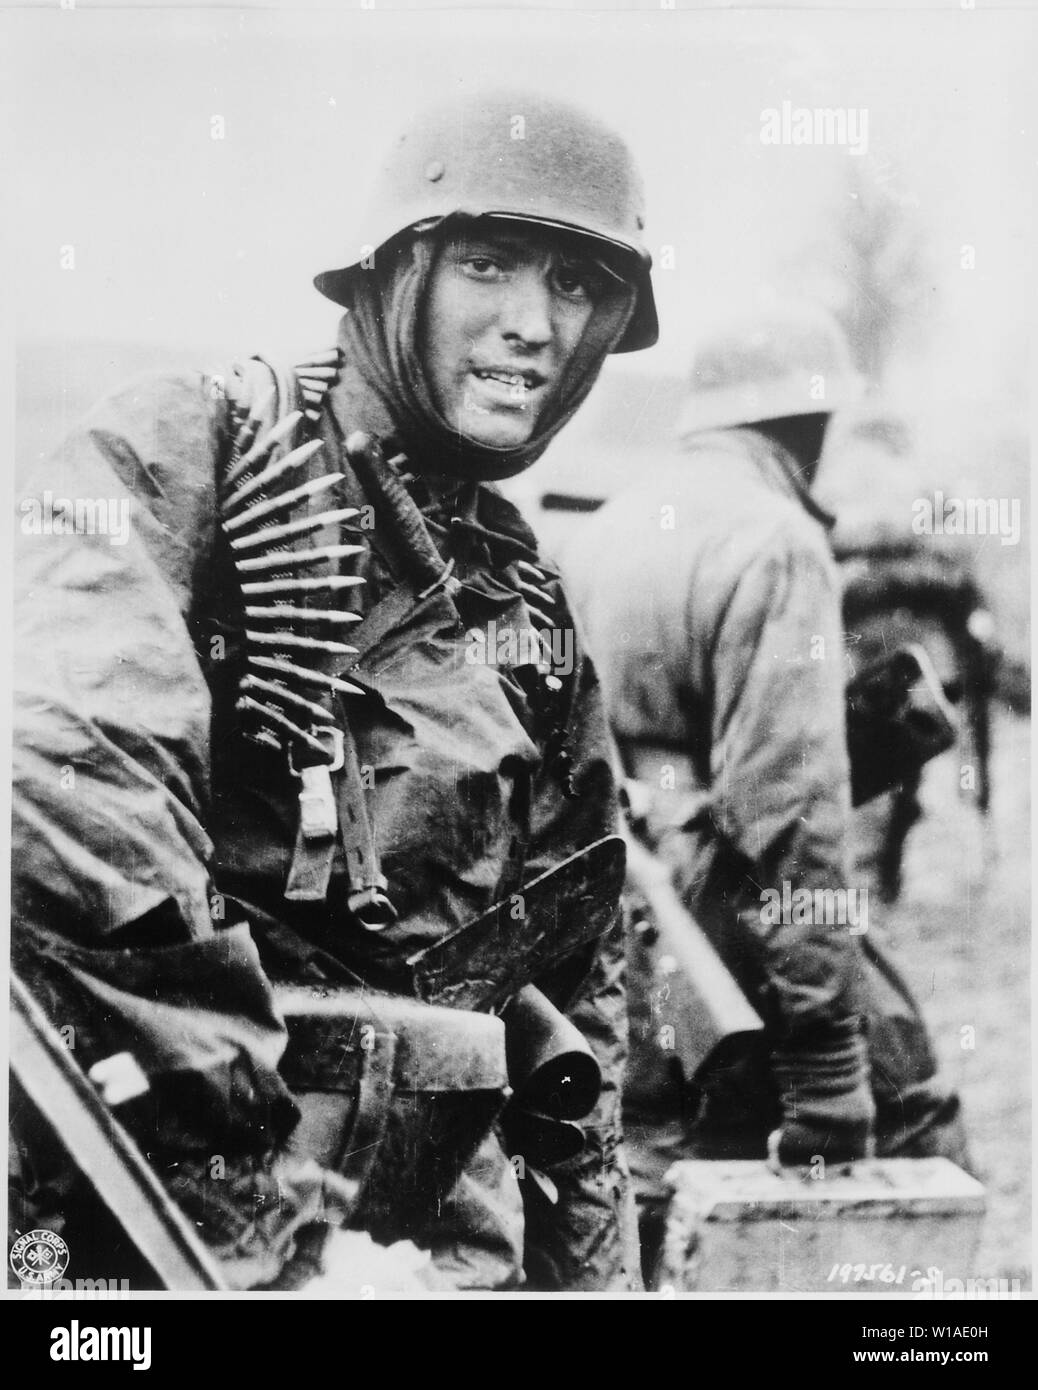 A German Waffen-SS soldier, heavily armed, carries ammunition boxes forward with companion in territory taken by their counter-offensive in this scene from captured German film. Belgium.; General notes:  Use War and Conflict Number 1070 when ordering a reproduction or requesting information about this image. Stock Photo